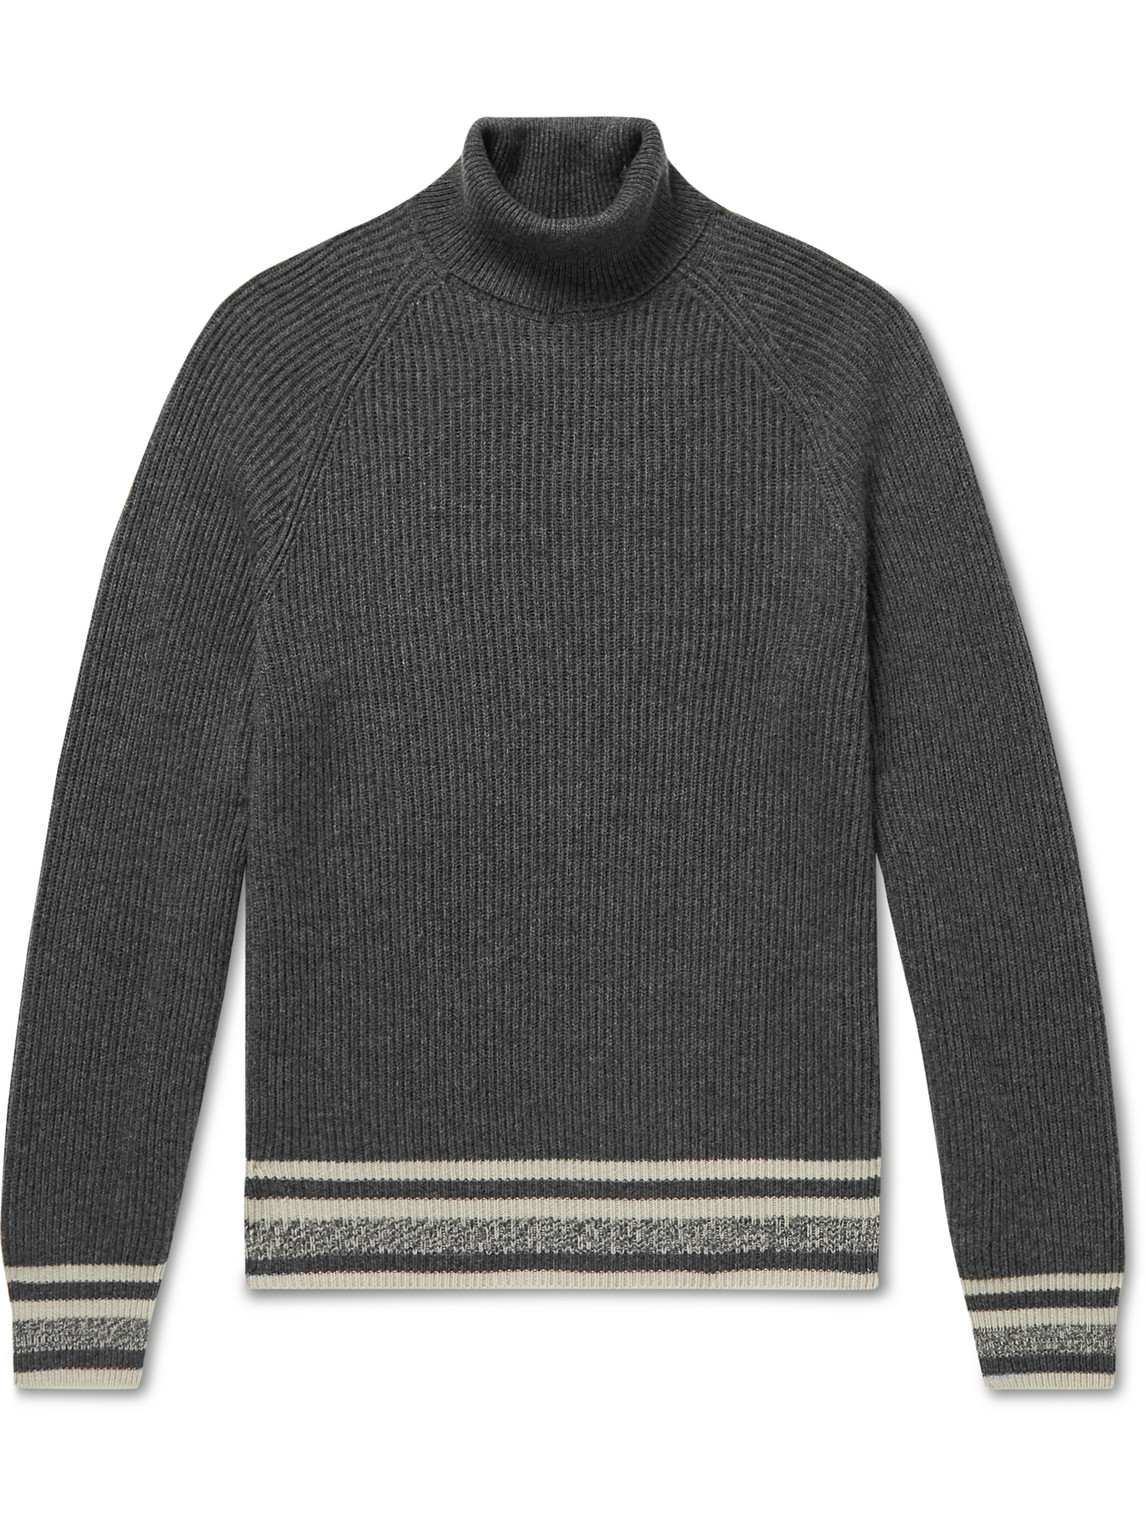 Ribbed Striped Cashmere Rollneck Sweater